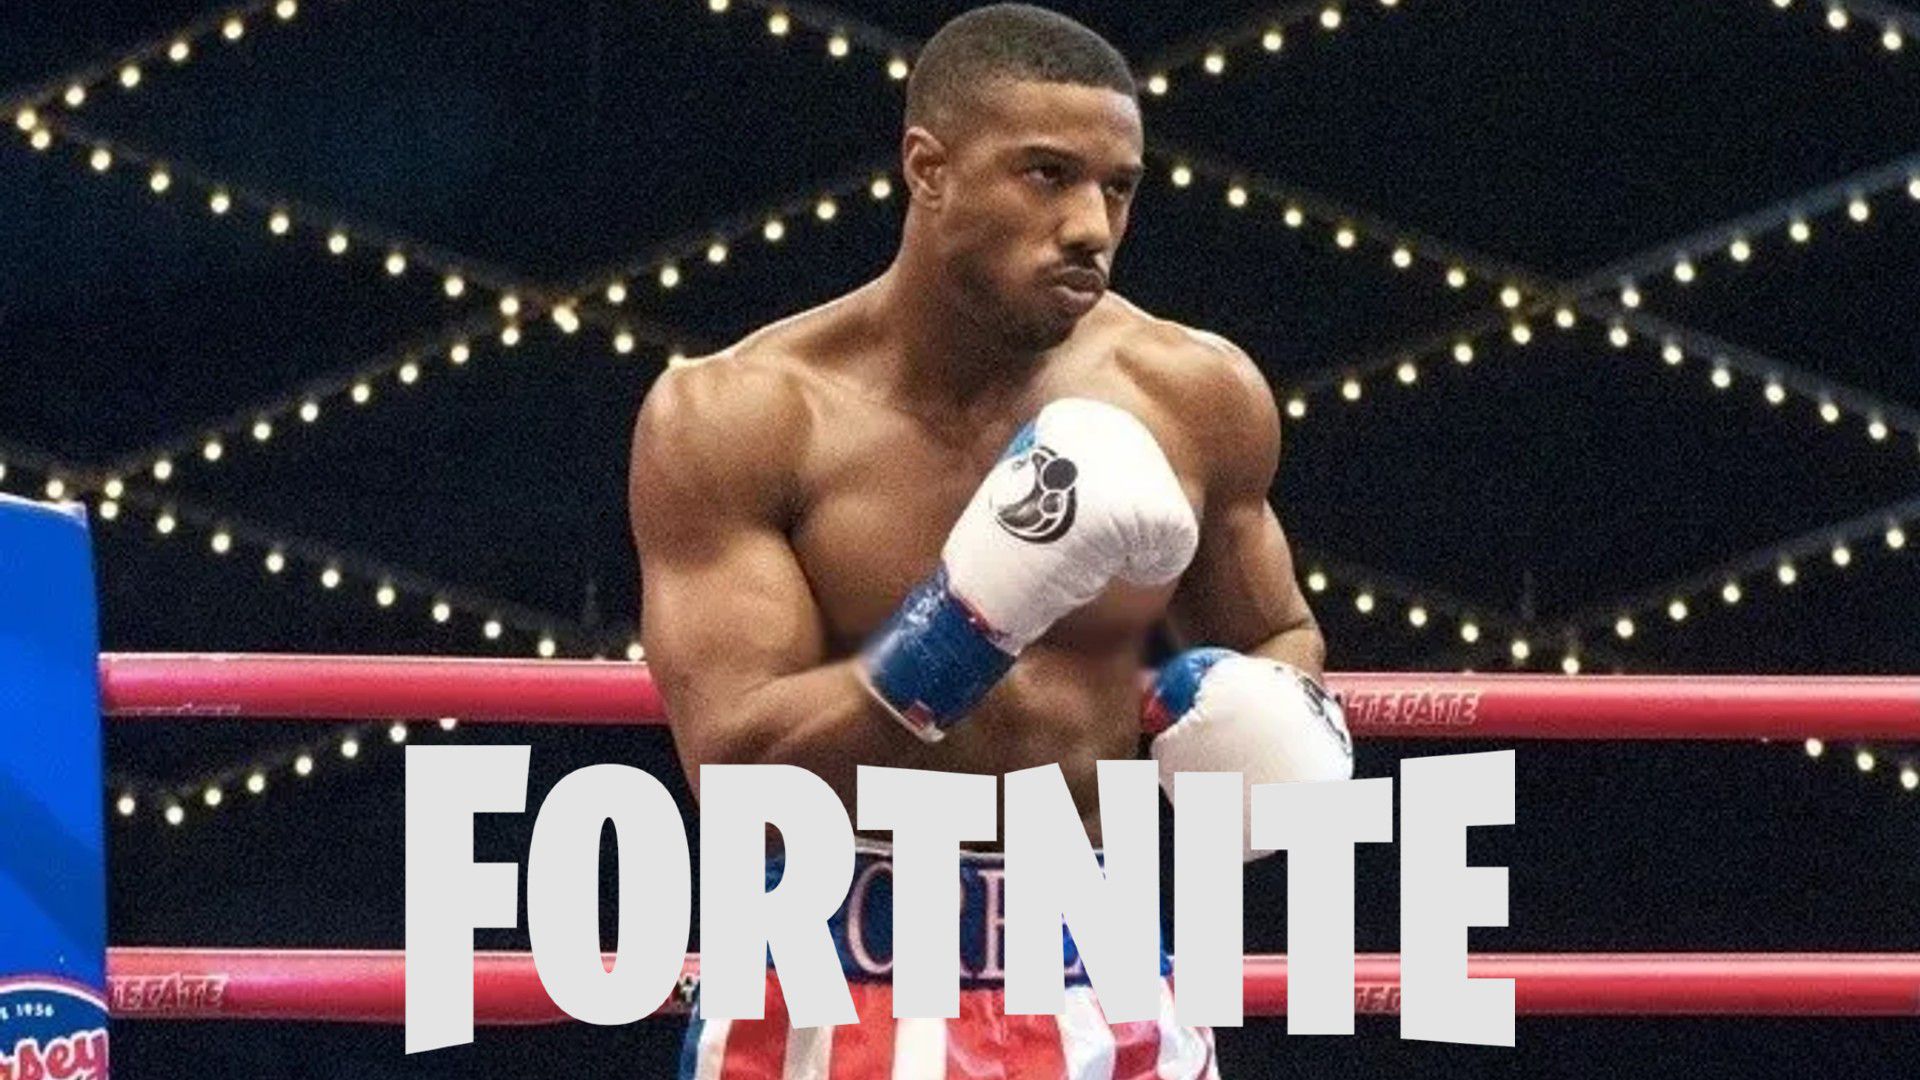 When will the Fortnite x Creed III collaboration be and what items to expect